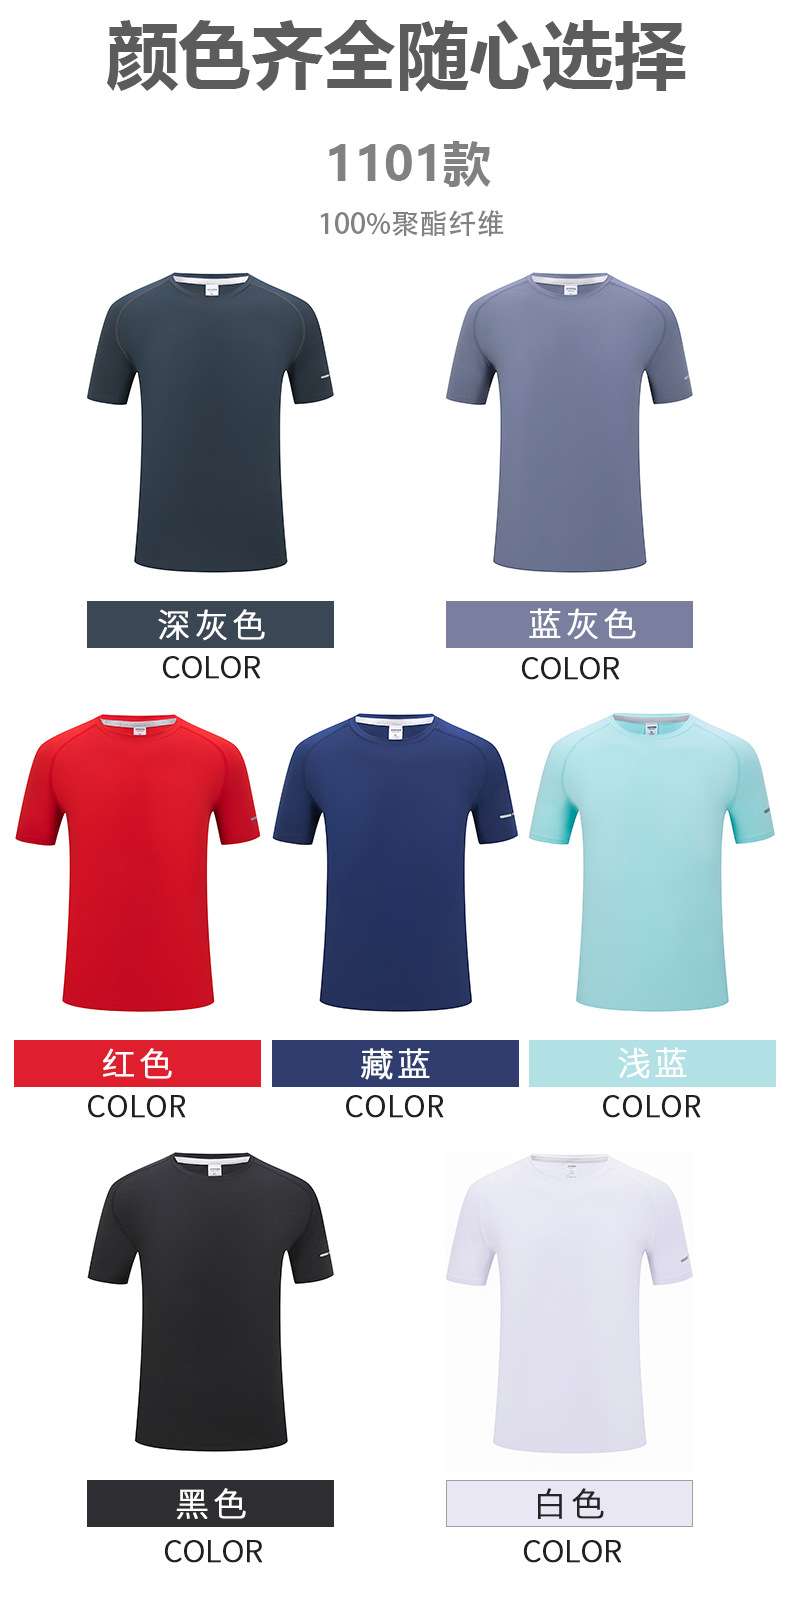 Summer sports quick-drying t-shirt men's half-sleeved men's t-shirt physical perspiration clothing solid color round neck quick-drying t-shirt advertising shirt